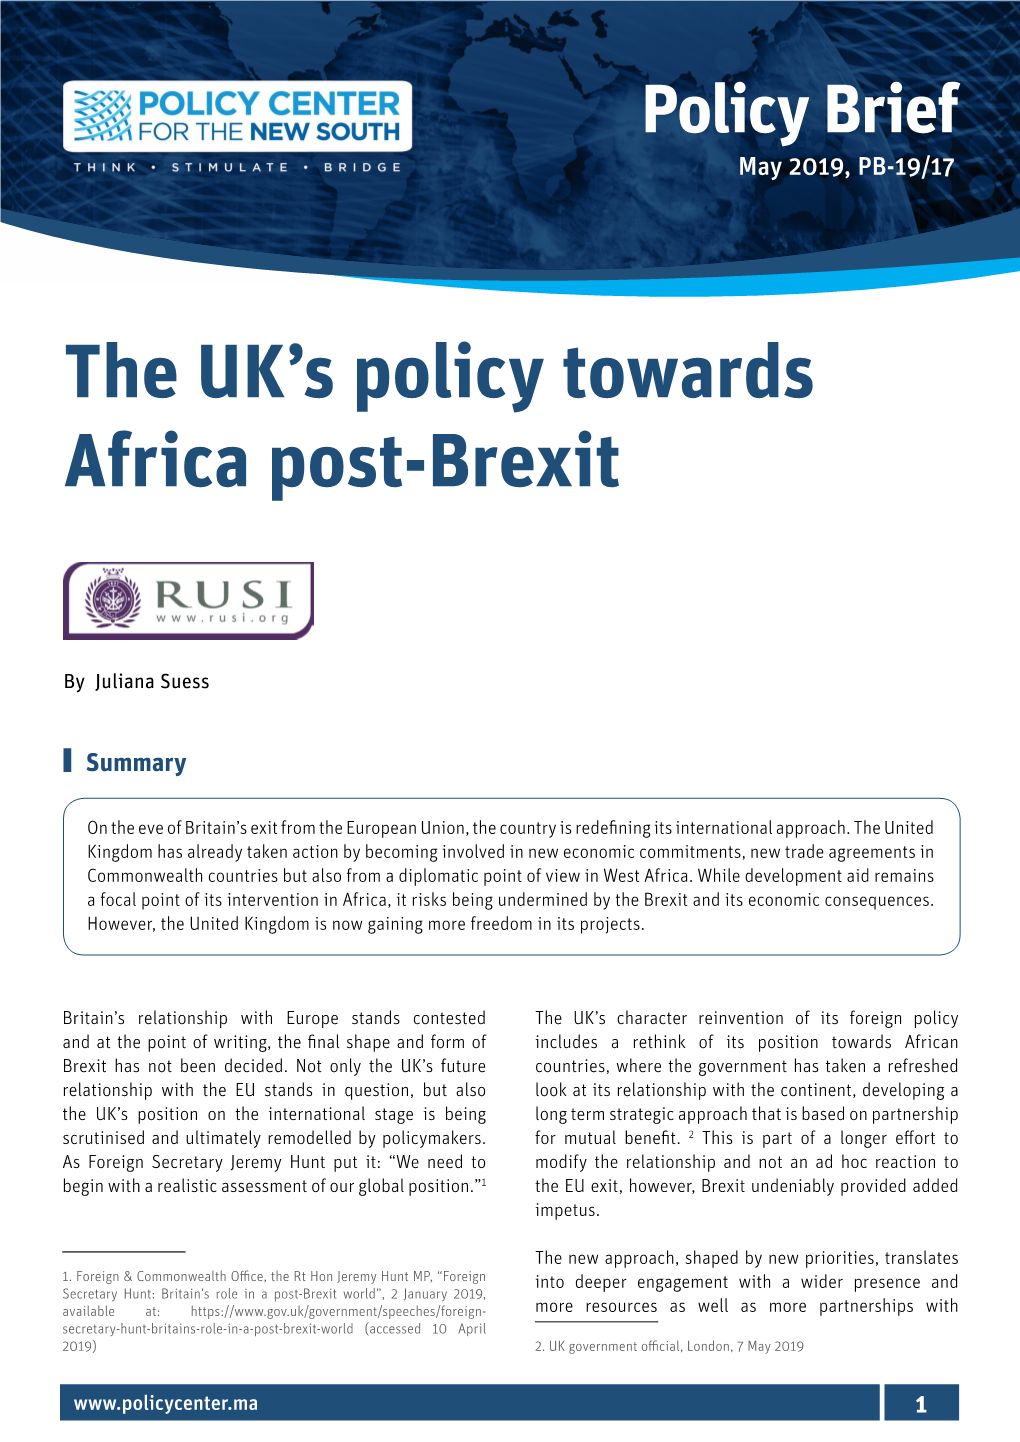 The UK's Policy Towards Africa Post-Brexit